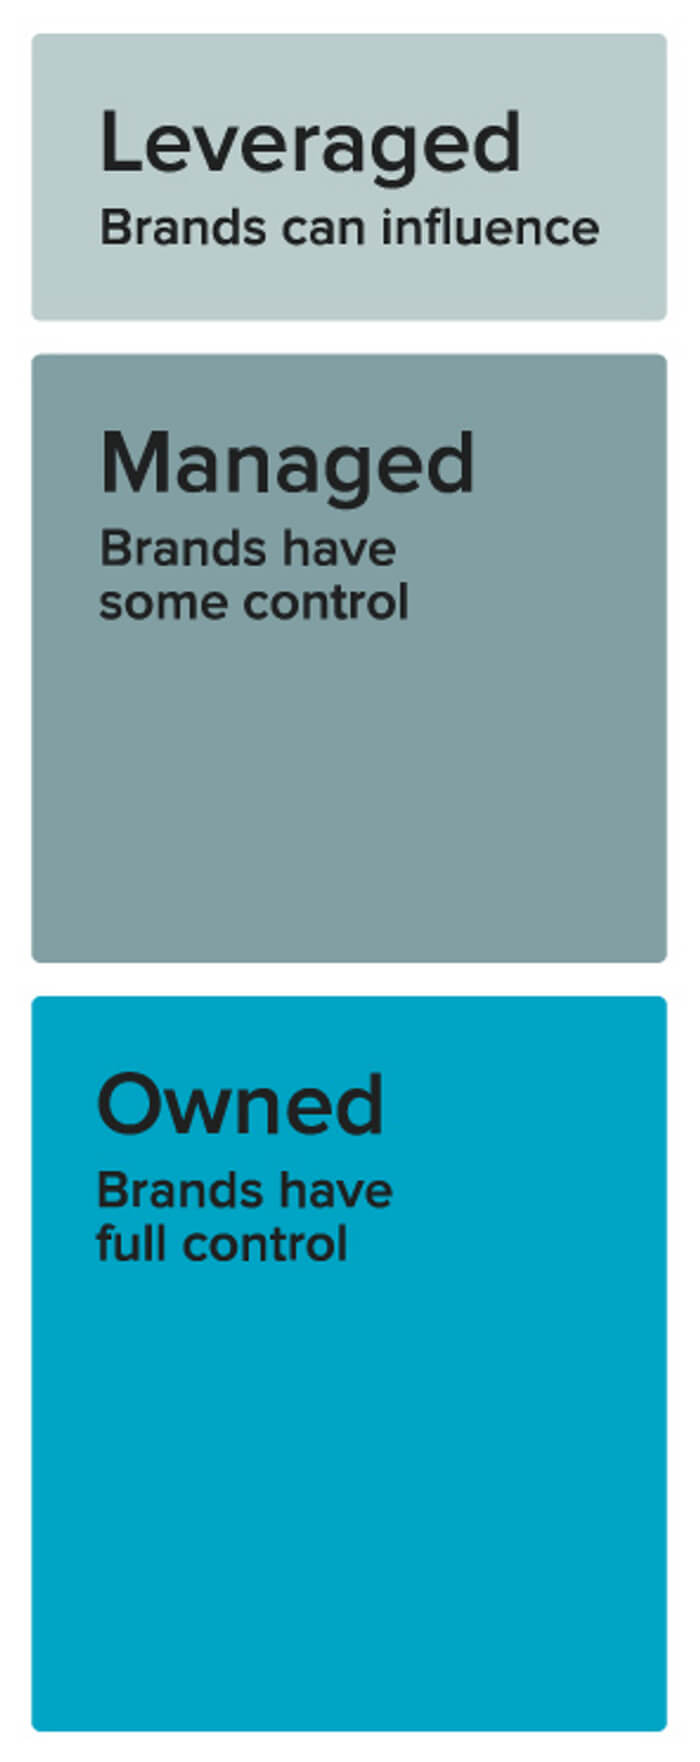 Leveraged: Brands can influence
Managed: Brands have some control
Owned: Brands have full control 